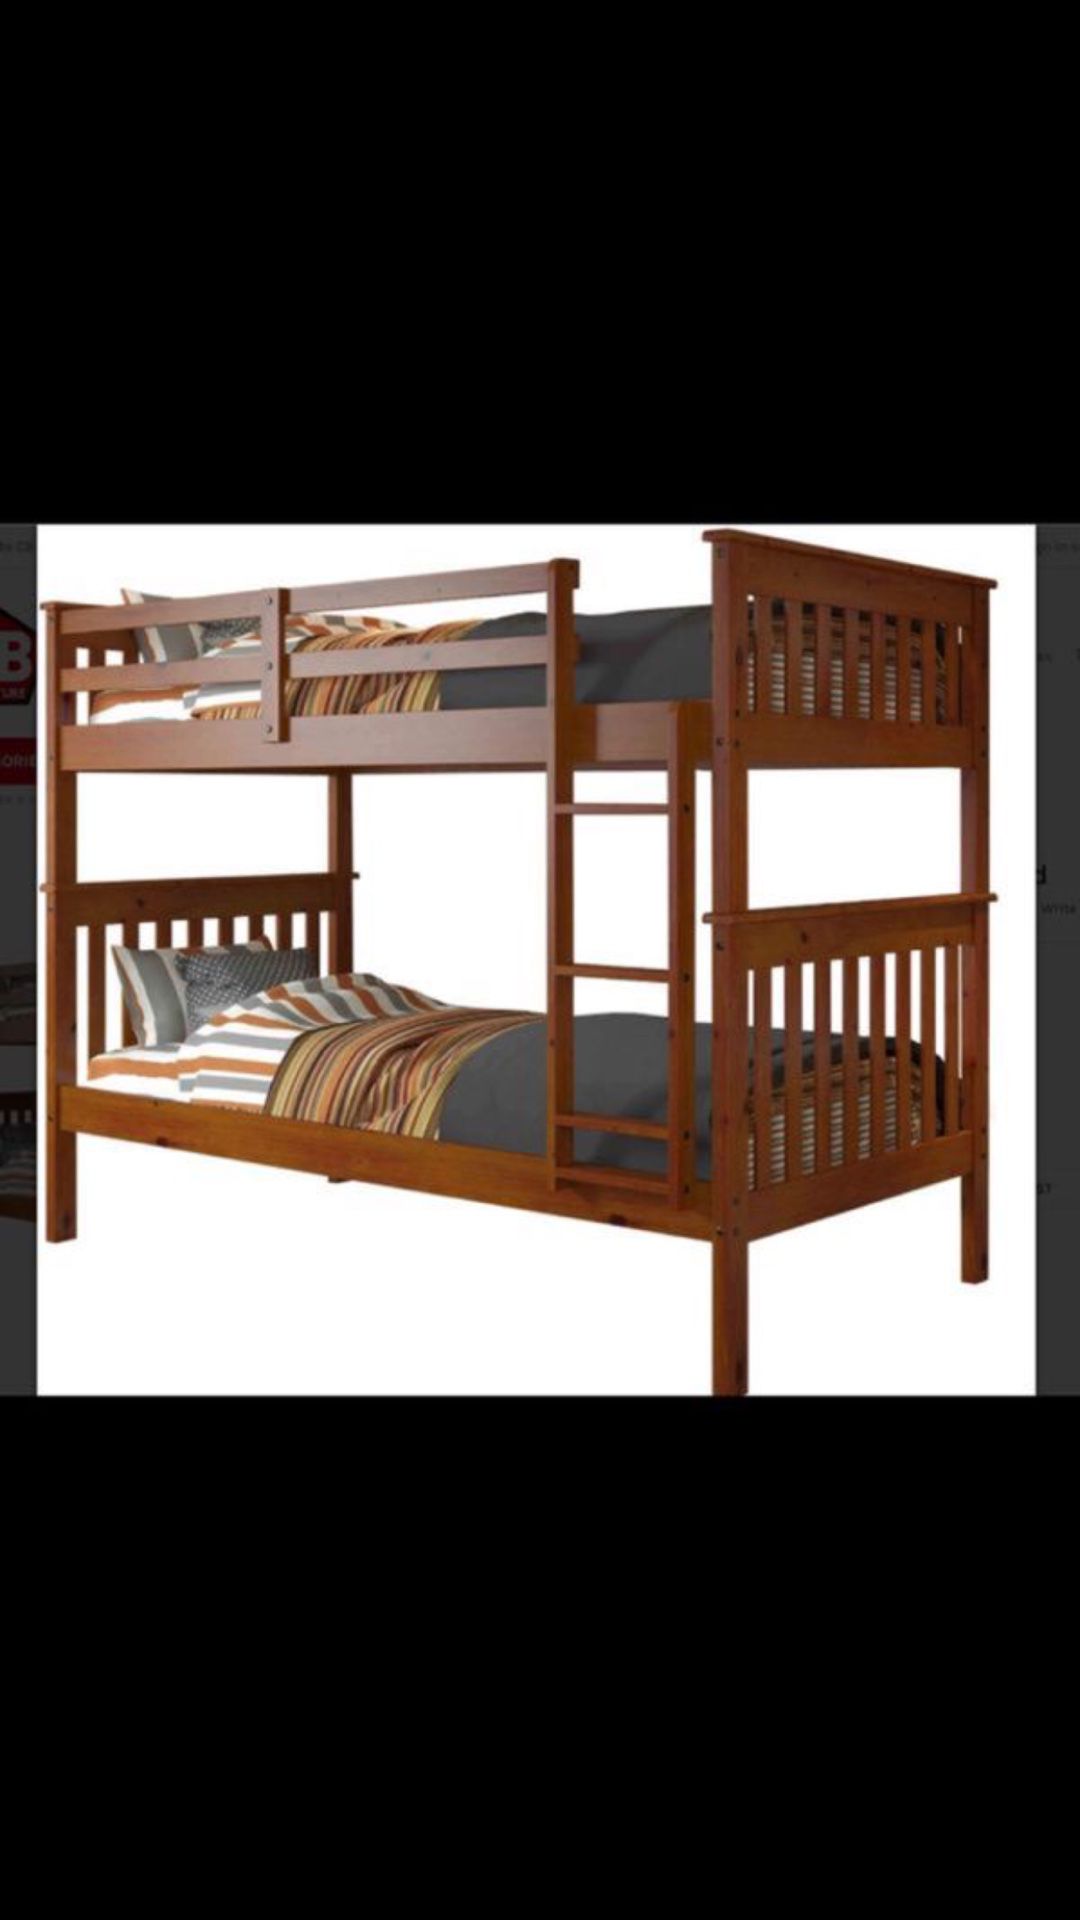 Bunk bed twin over twin asking 150 obo not free